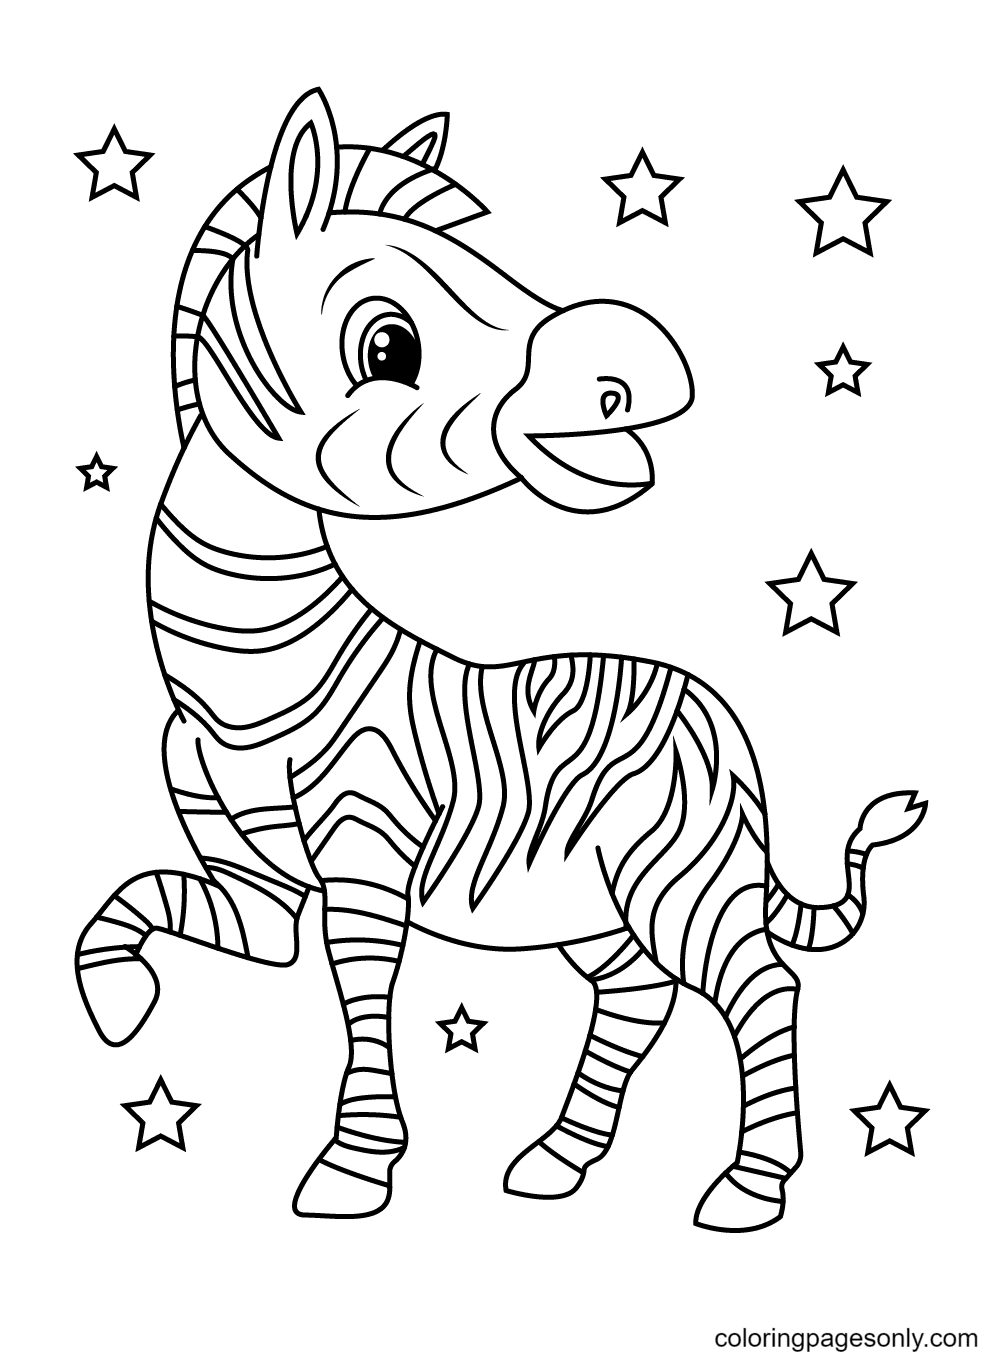 Zebra Surrounded By Stars Coloring Pages